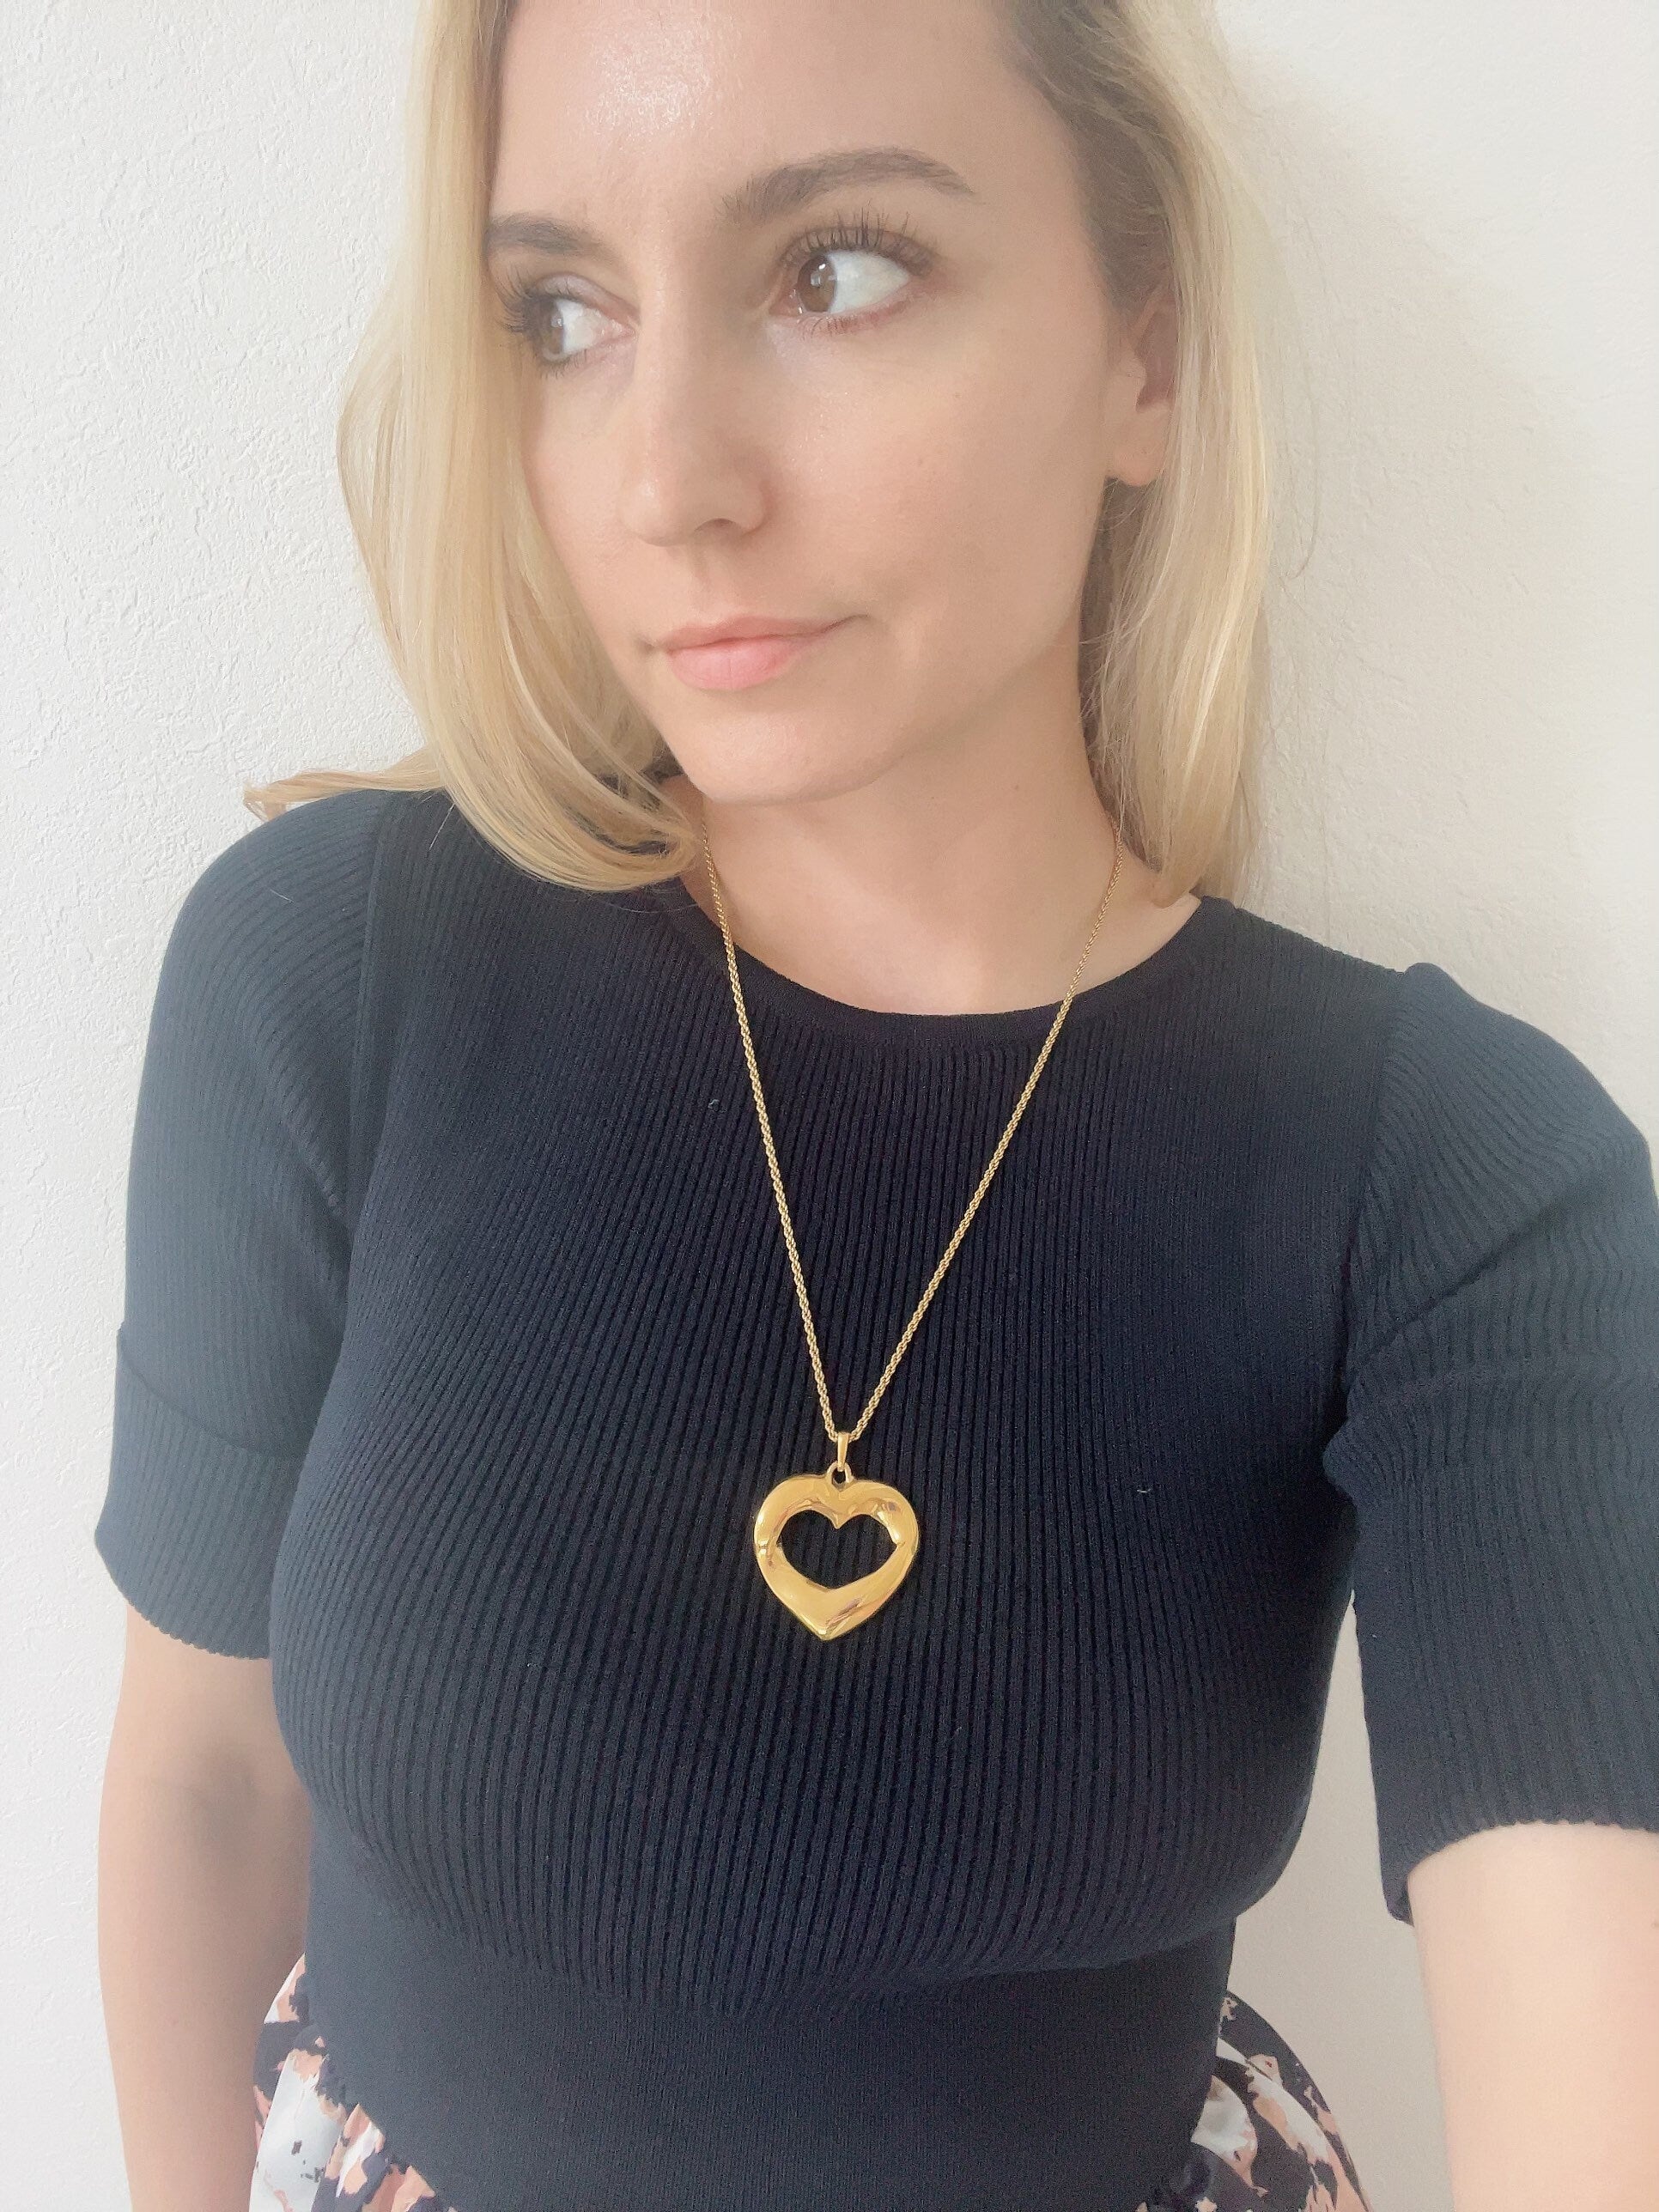 Vintage YSL Yves Saint Laurent Necklace, Pendant Necklace Gold, Openwork Heart Necklace, Vintage Necklace Gold, Jewelry for Women